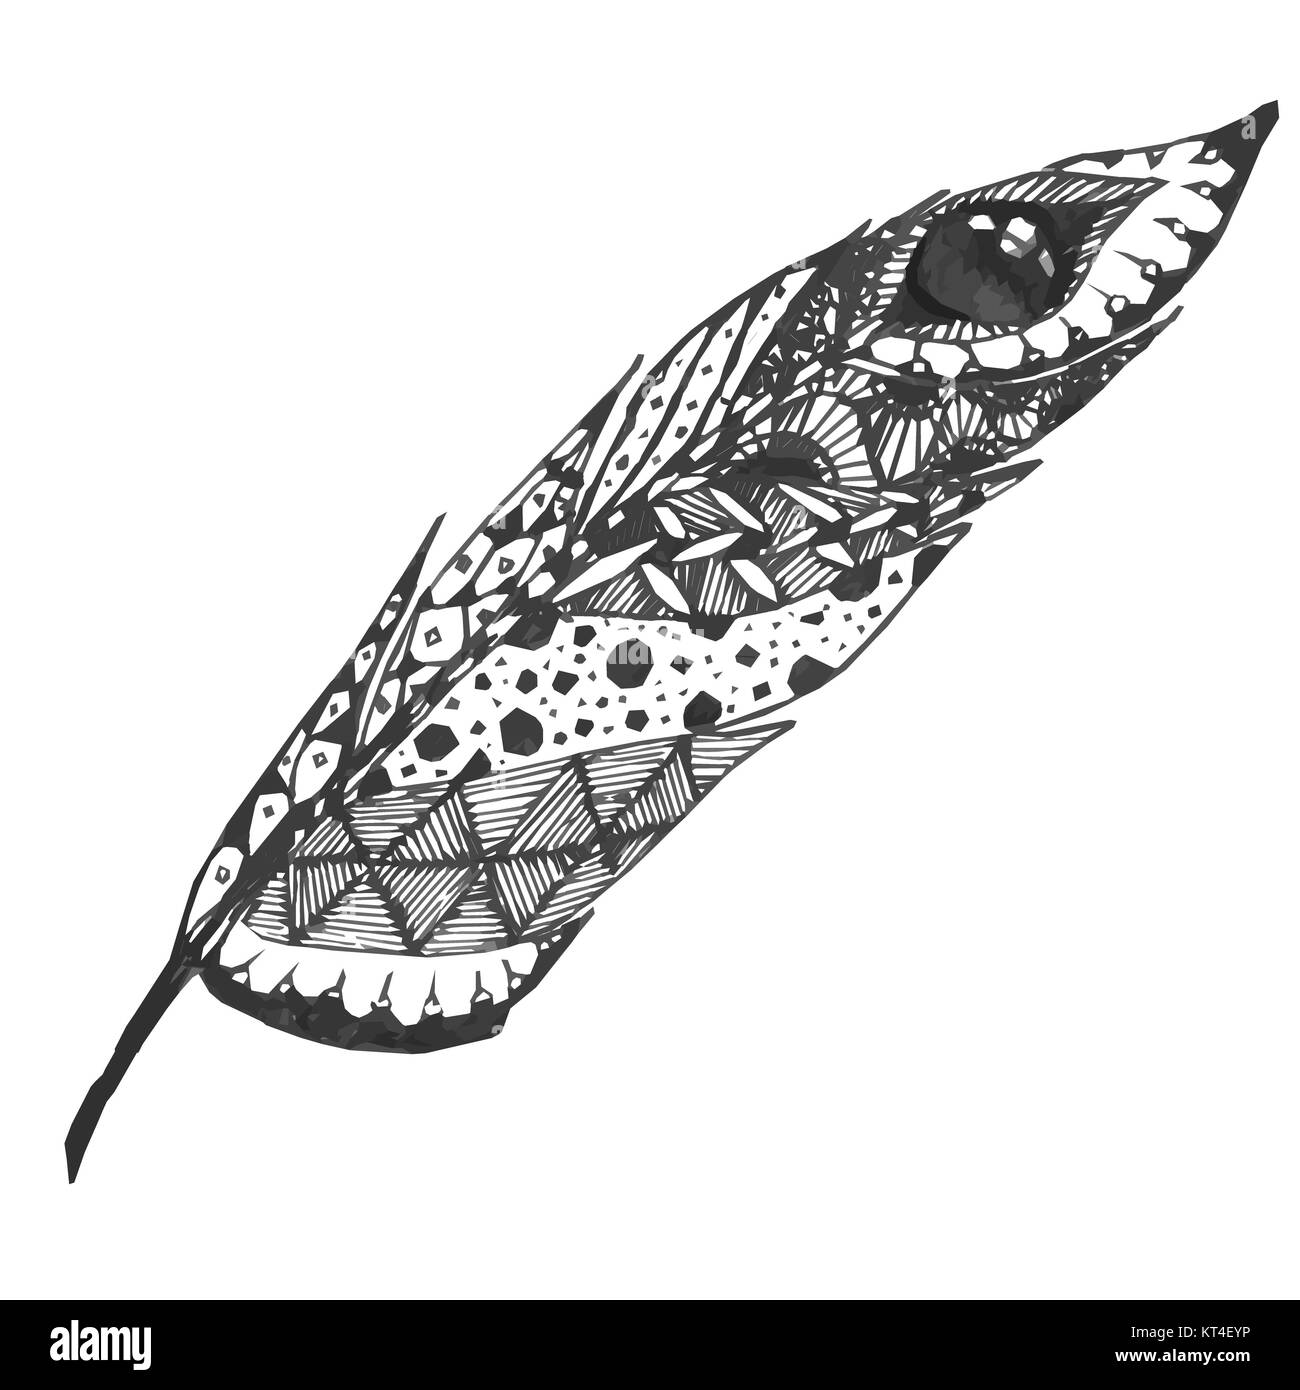 Hand drawn doodle zentangle feather isolated from background. Black and white illustration with different ornaments. Stock Photo